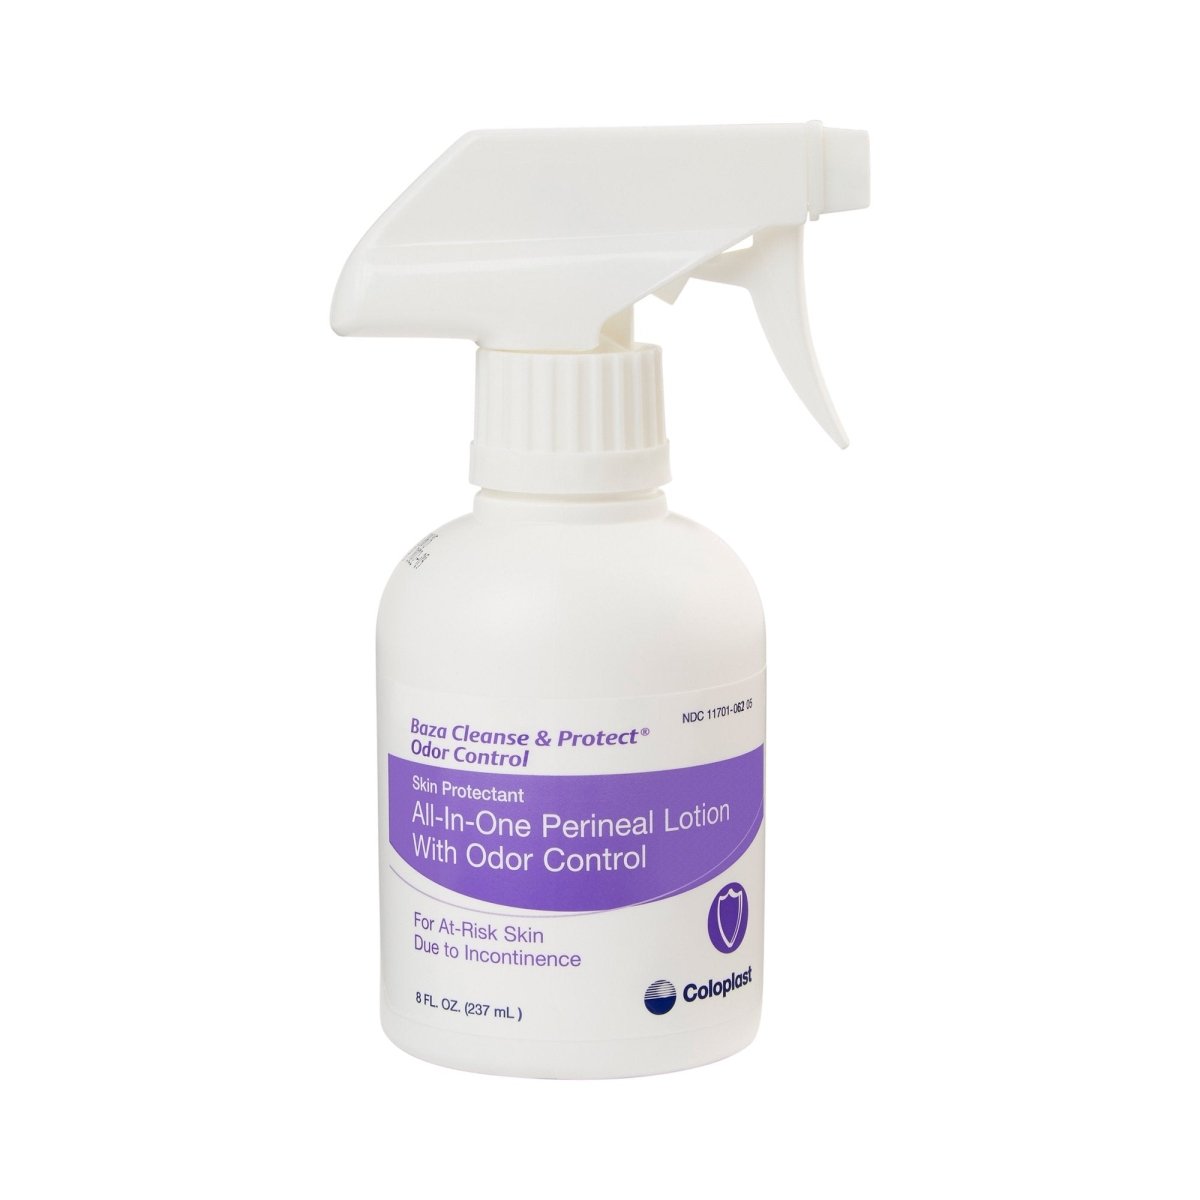 Baza Cleanse and Protect with Odor Control Perineal Wash, 8 oz. Spray Pump Bottle - 468904_EA - 1